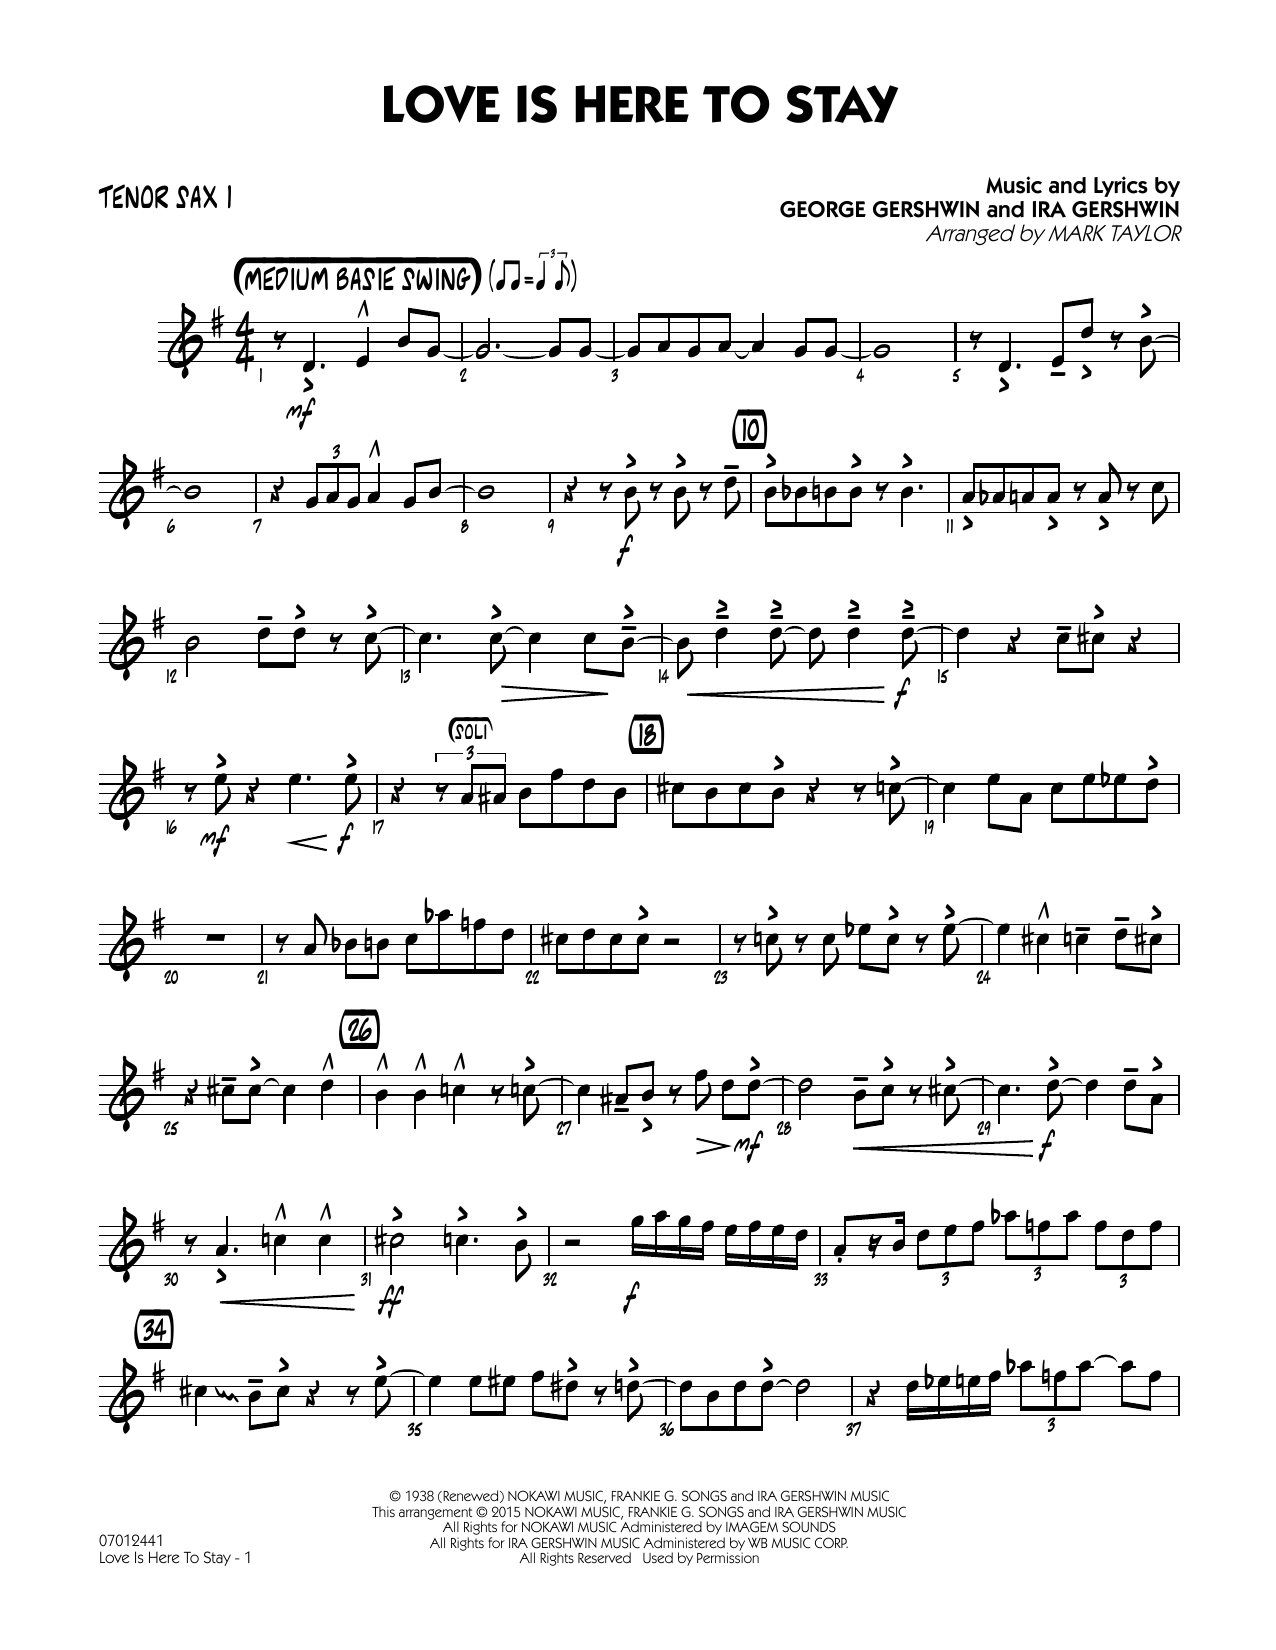 Mark Taylor Love Is Here to Stay - Tenor Sax 1 sheet music notes and chords. Download Printable PDF.